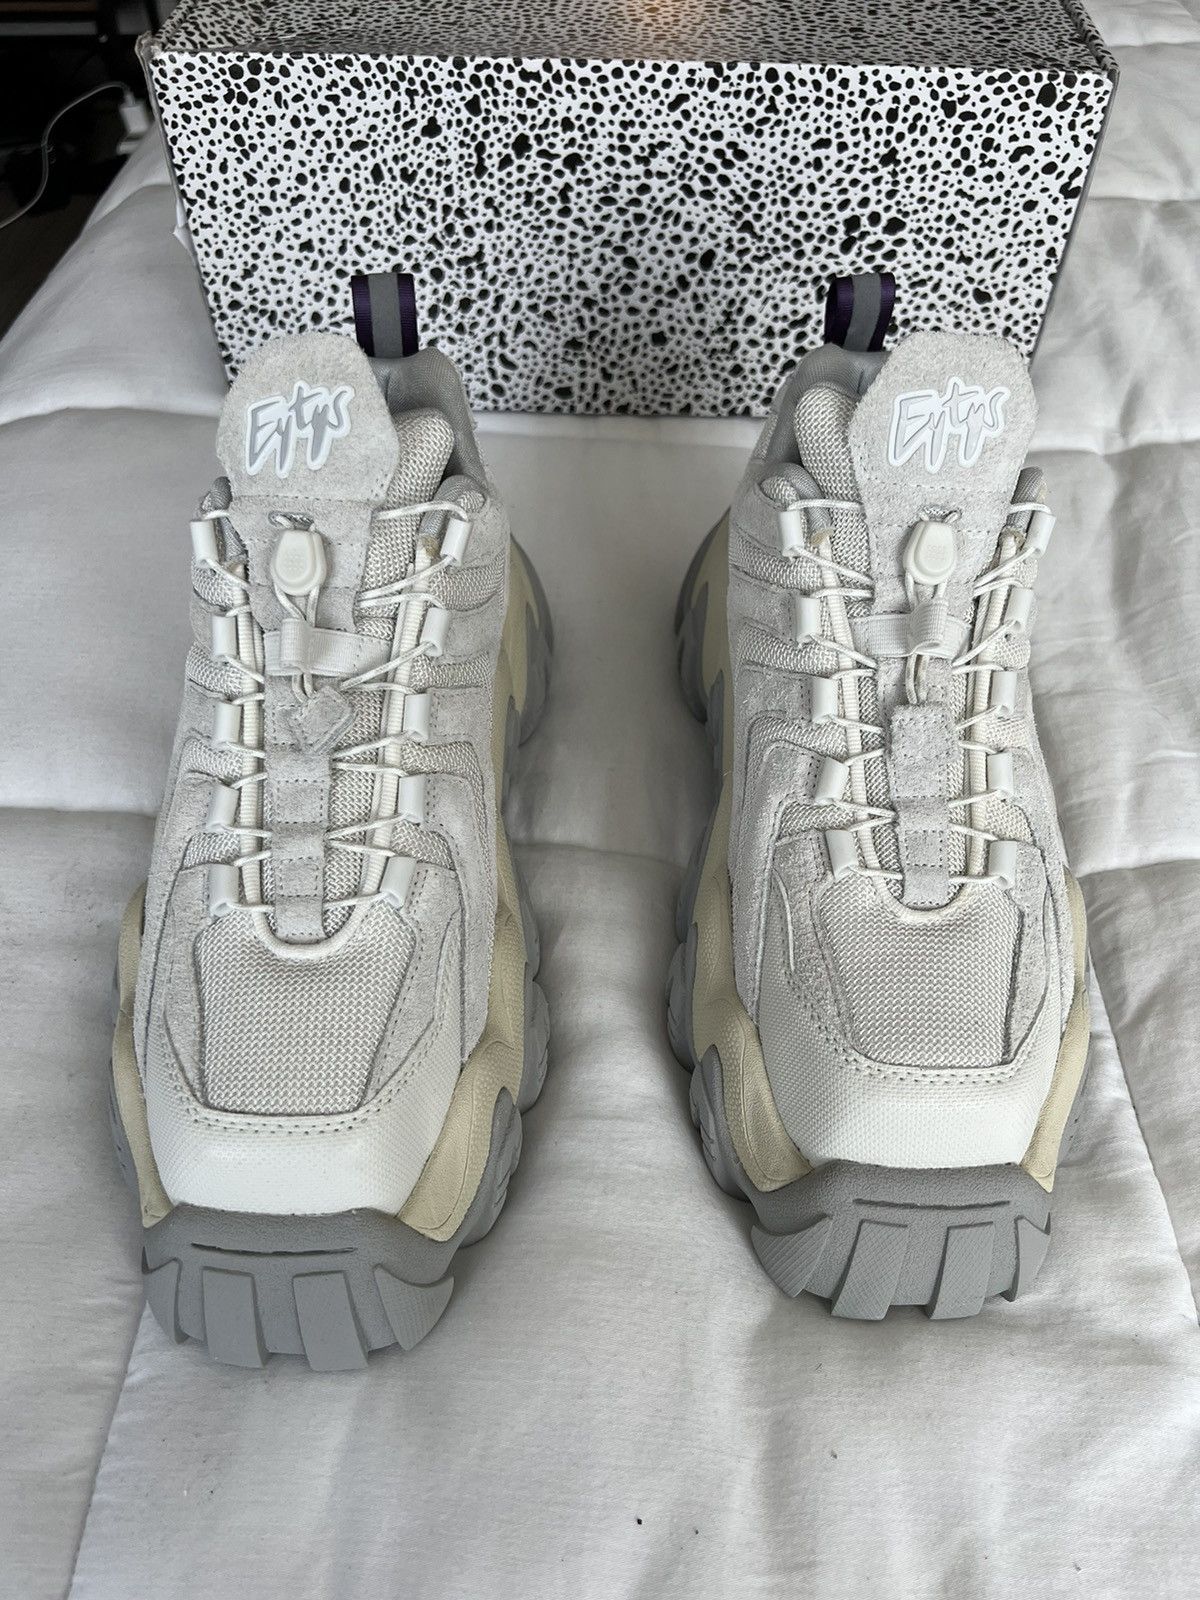 Eytys Eytys Off-White Halo Sneakers | Grailed